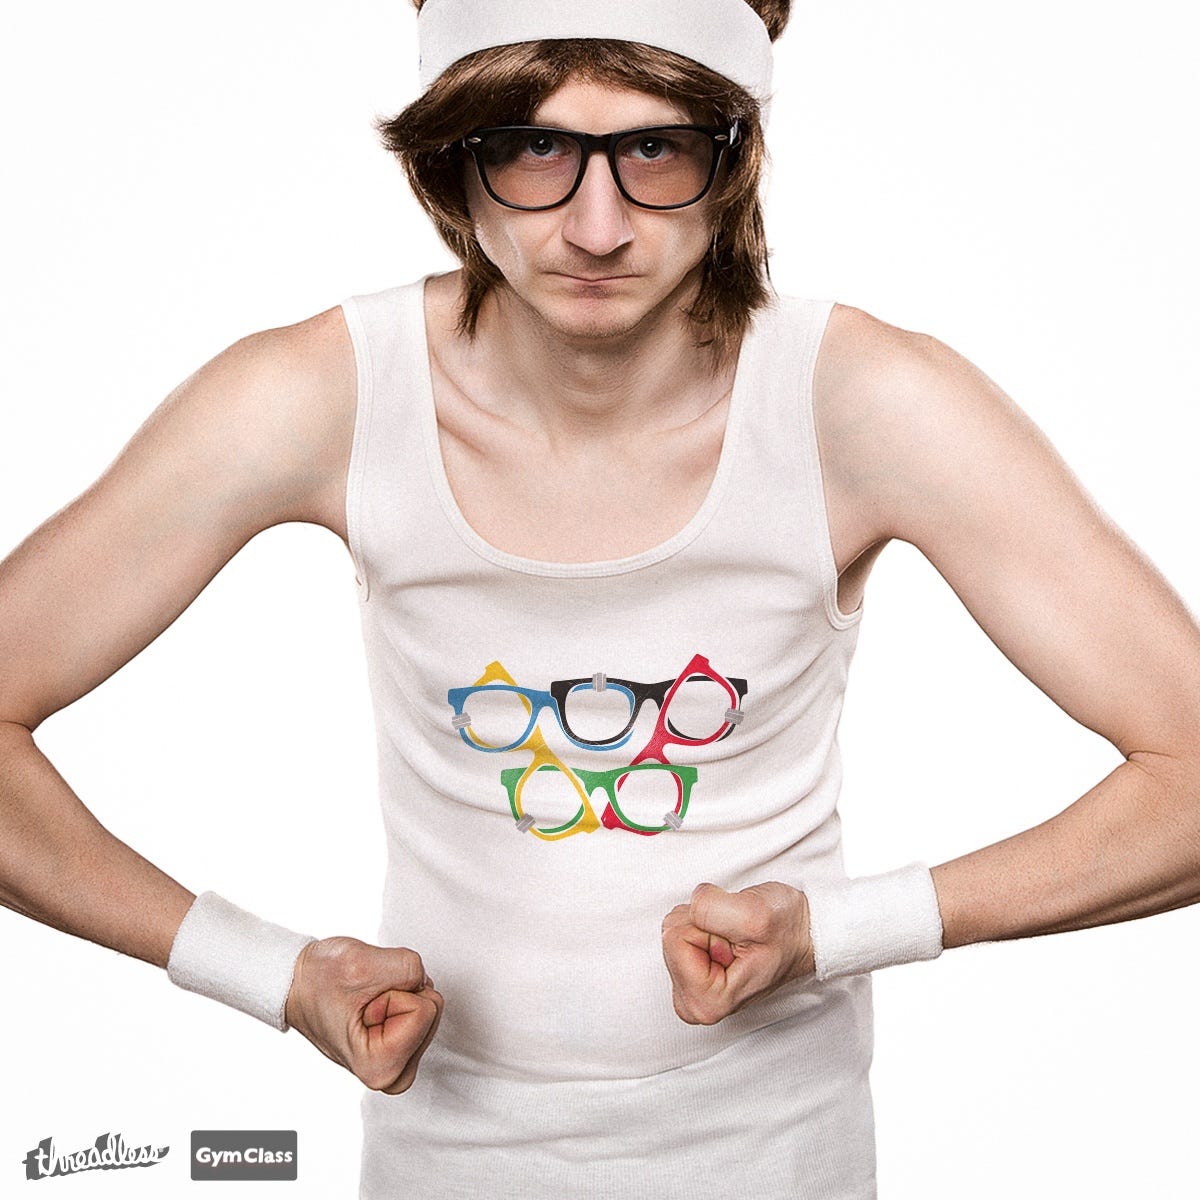 a skinny white man in nerdy glasses wears a tank top with glasses on it configured to look like the olympics logo